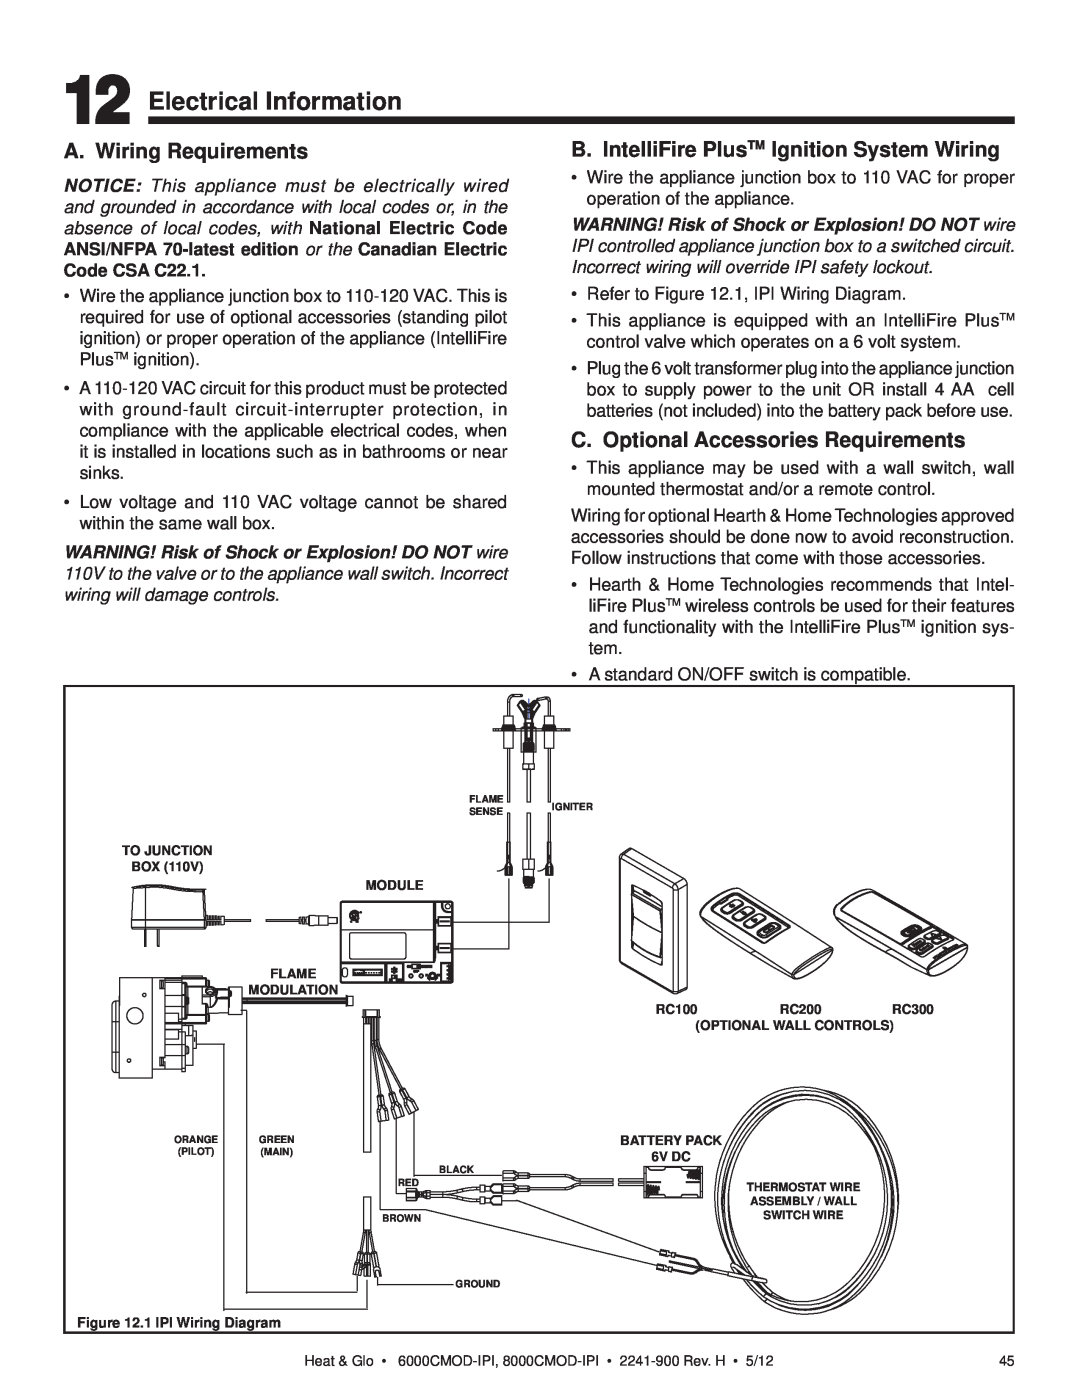 Heat & Glo LifeStyle 6000CMOD-IPI Electrical Information, A. Wiring Requirements, C. Optional Accessories Requirements 